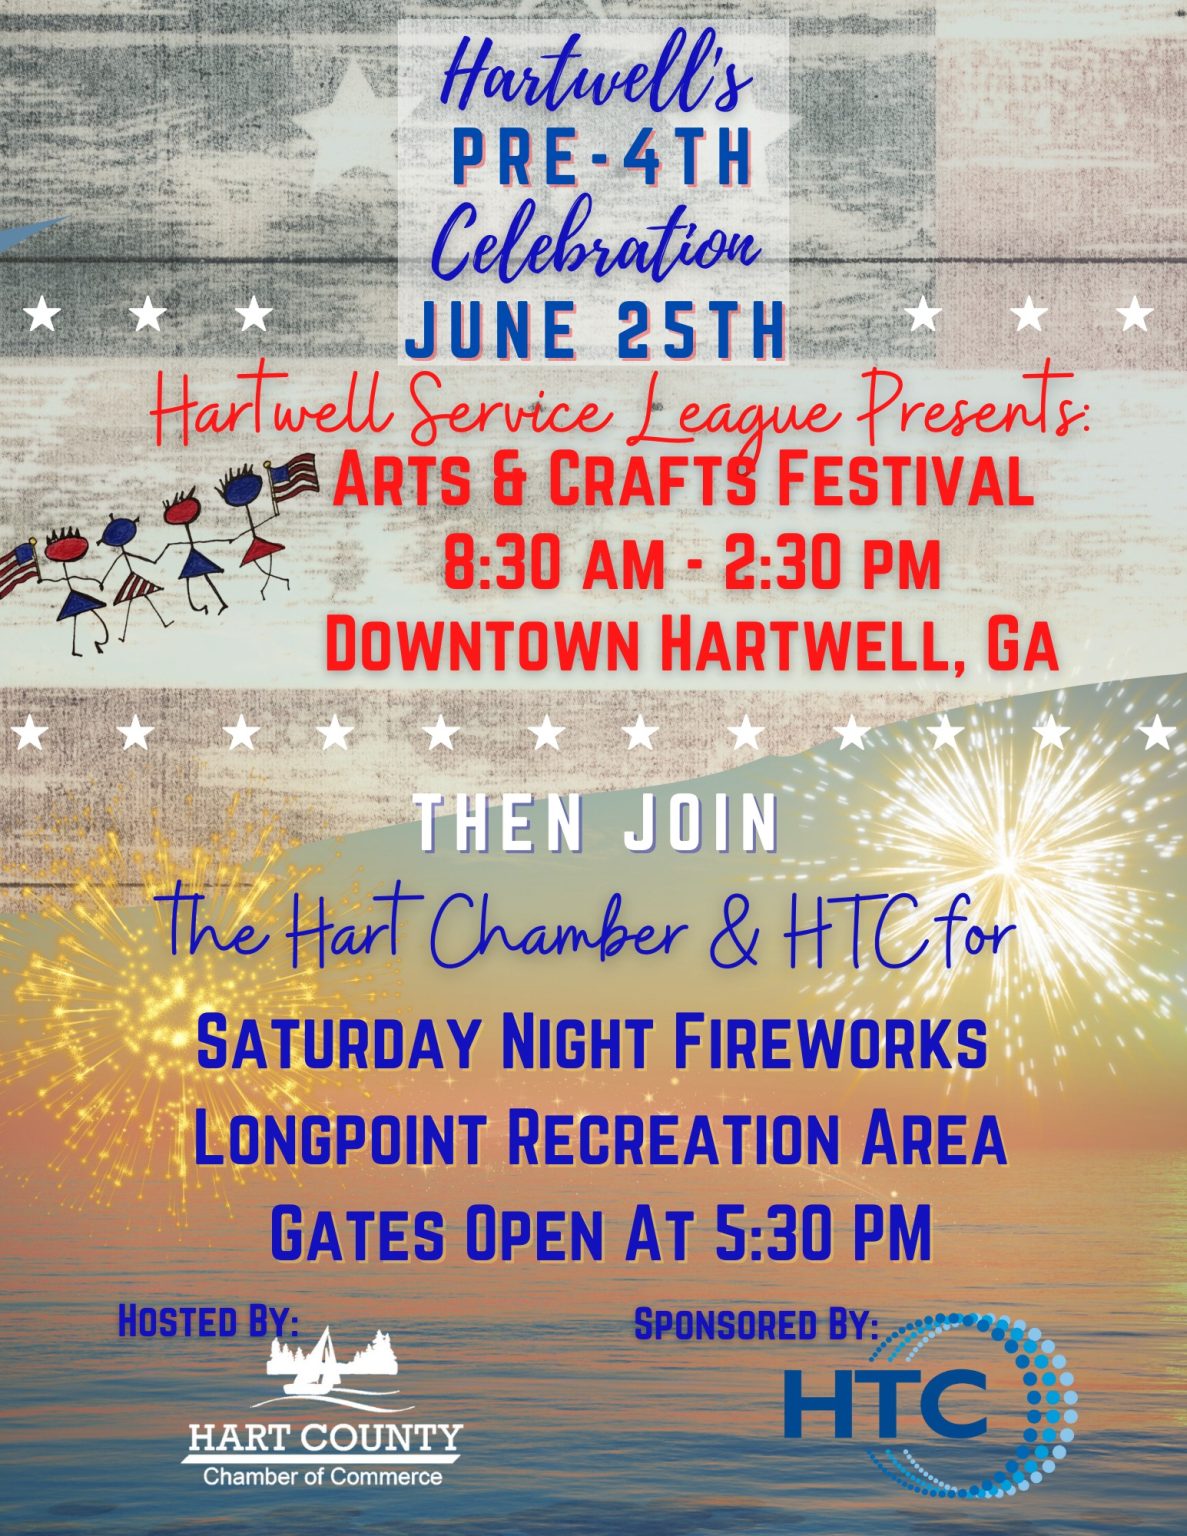 Annual PreFourth Celebration Set for Saturday in Hartwell 92.1 WLHR